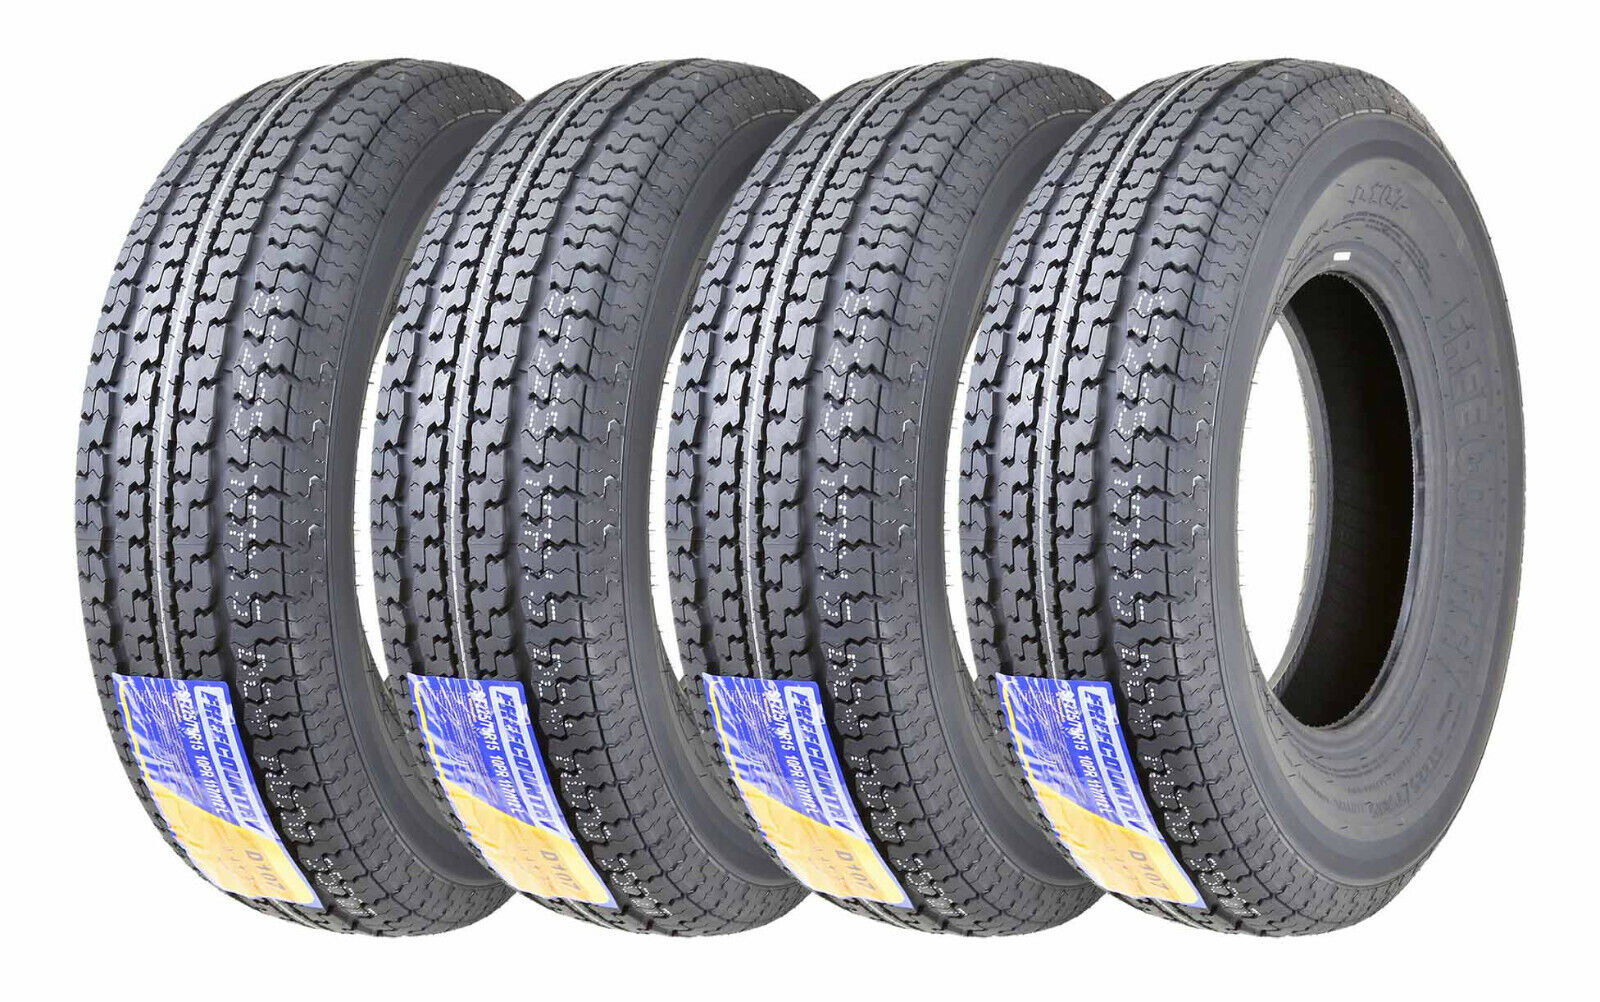 Set 4 ST225/75R15 FREE COUNTRY  Trailer Tires 10PR 225 75 15 w/Side Scuff Guard